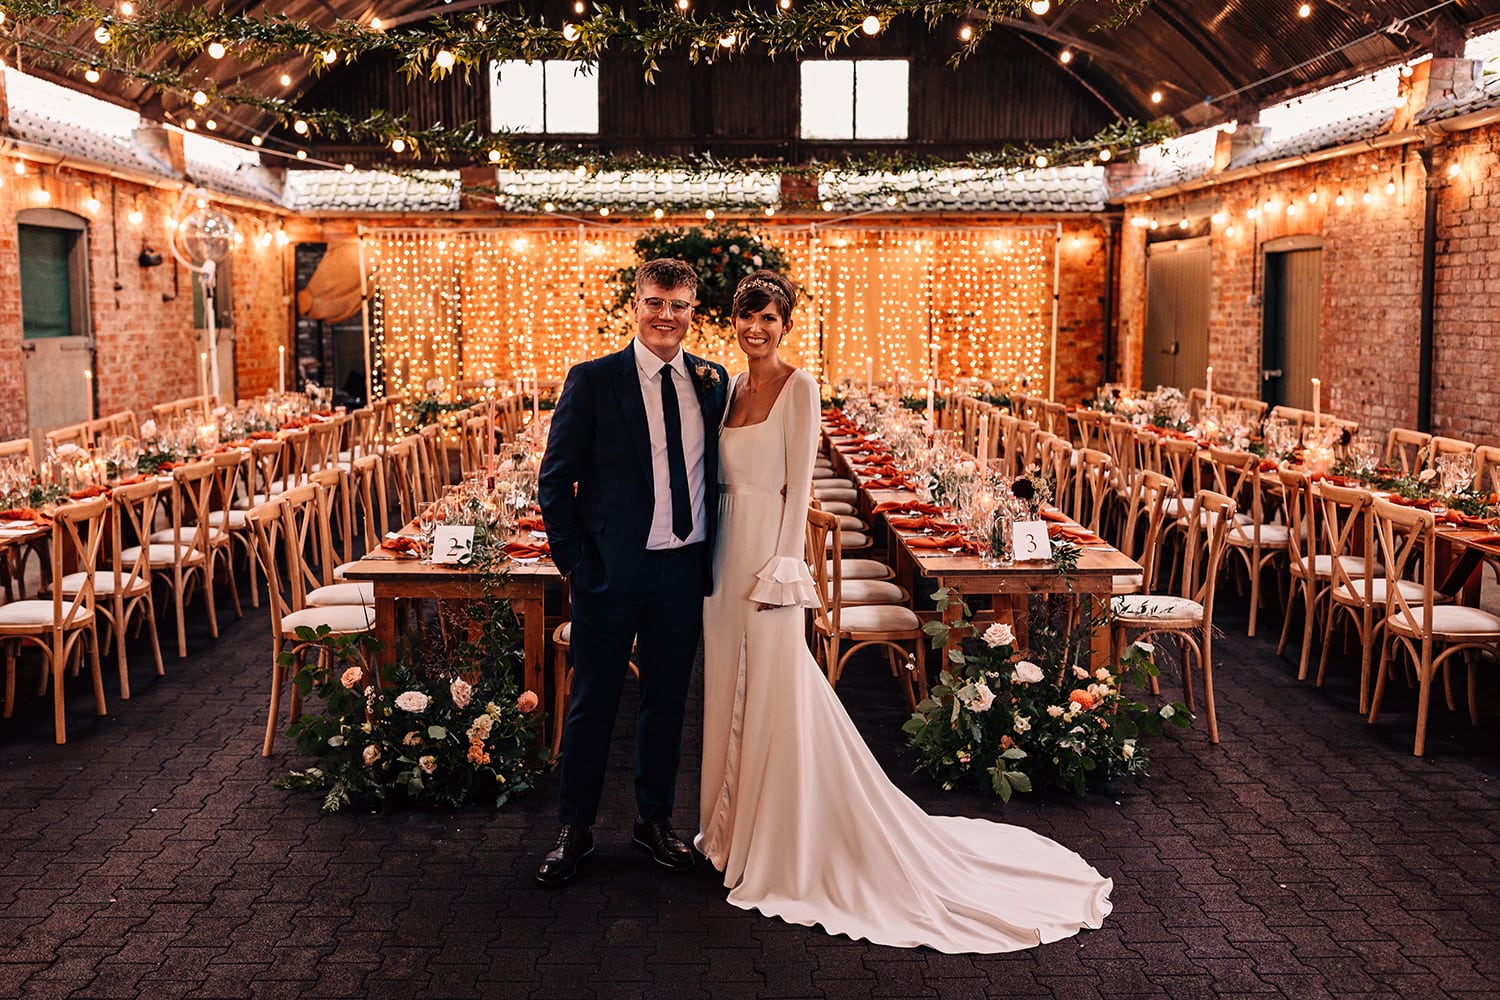 Bride and Groom stood in front of a wall of fairy lights and their rustic barn wedding table set up